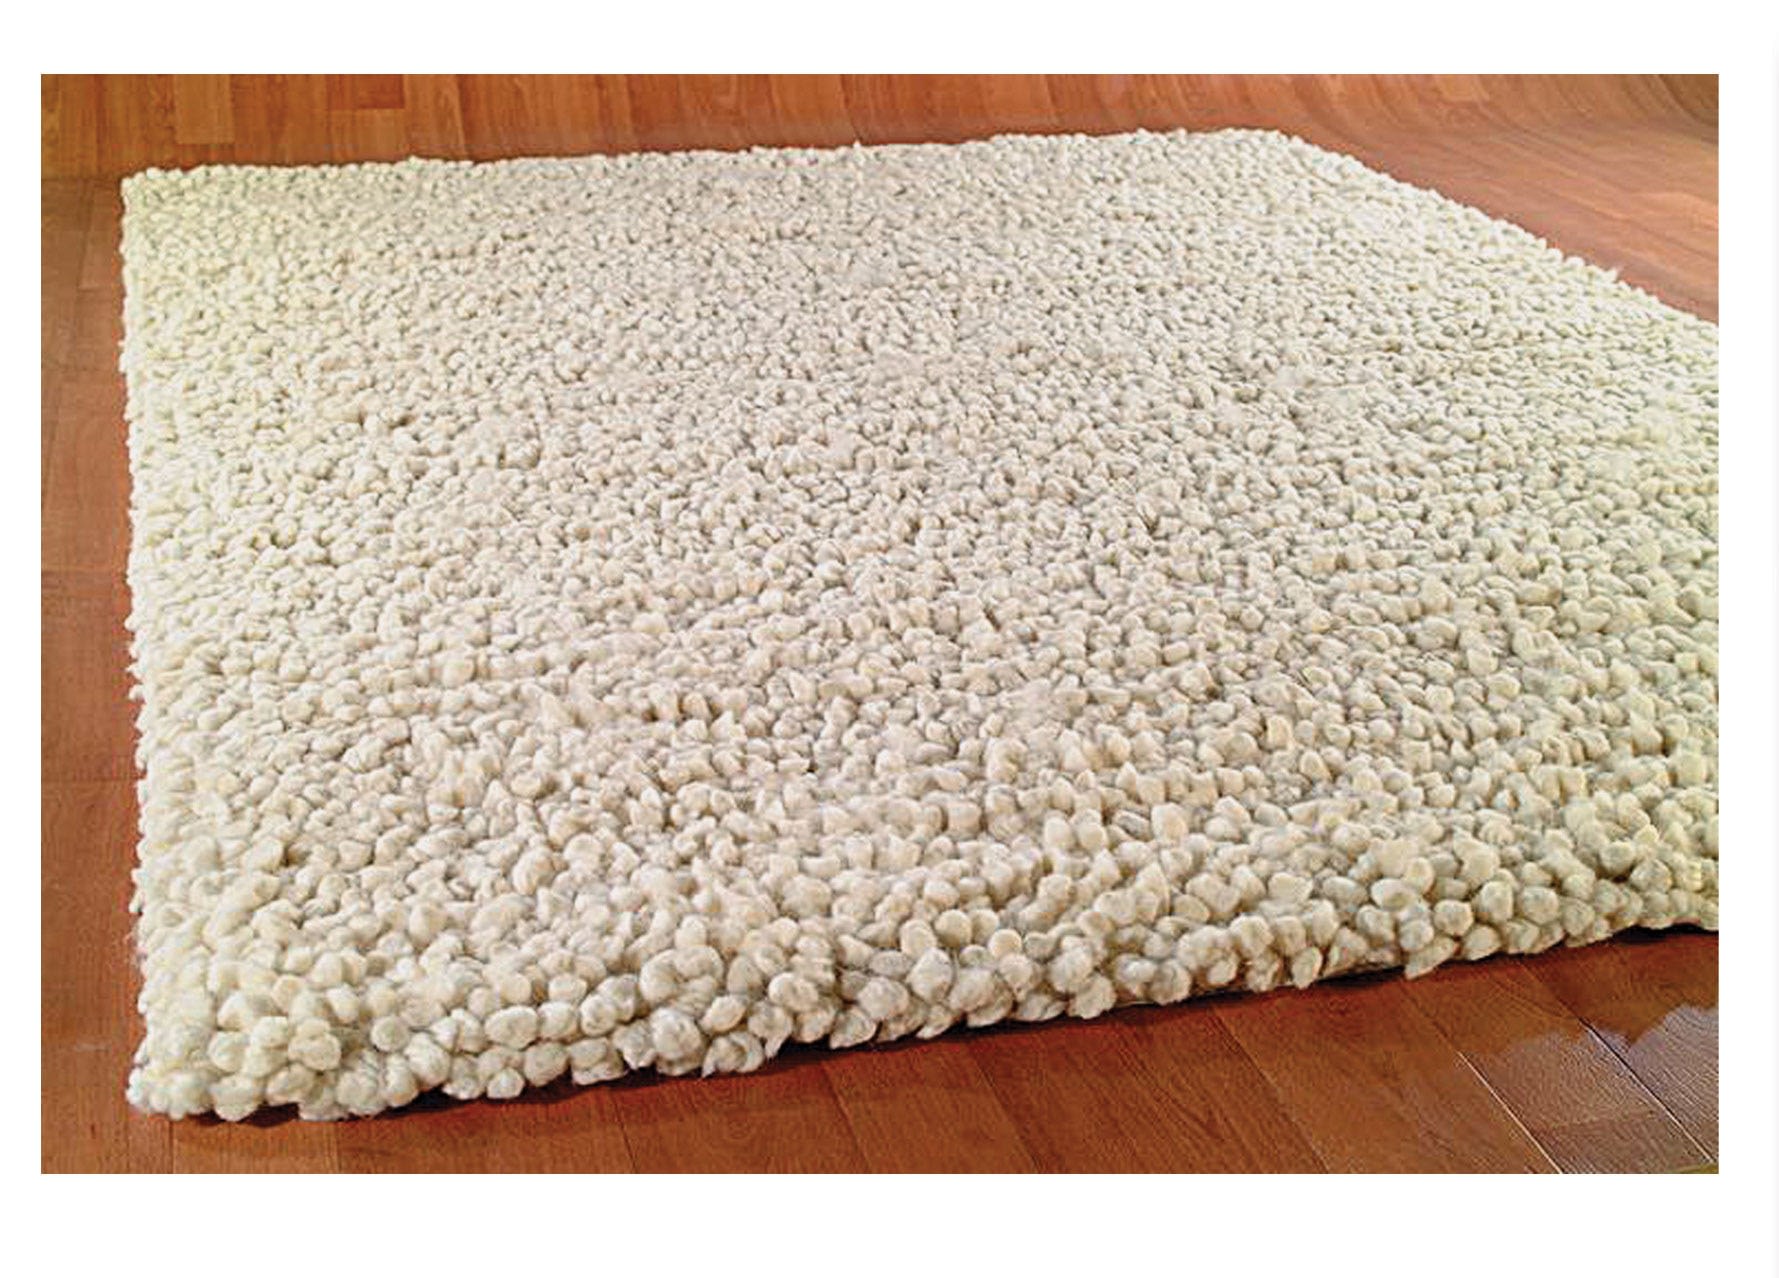 How To Clean A Wool Rug - Carpet Cleaning Service, Vancouver